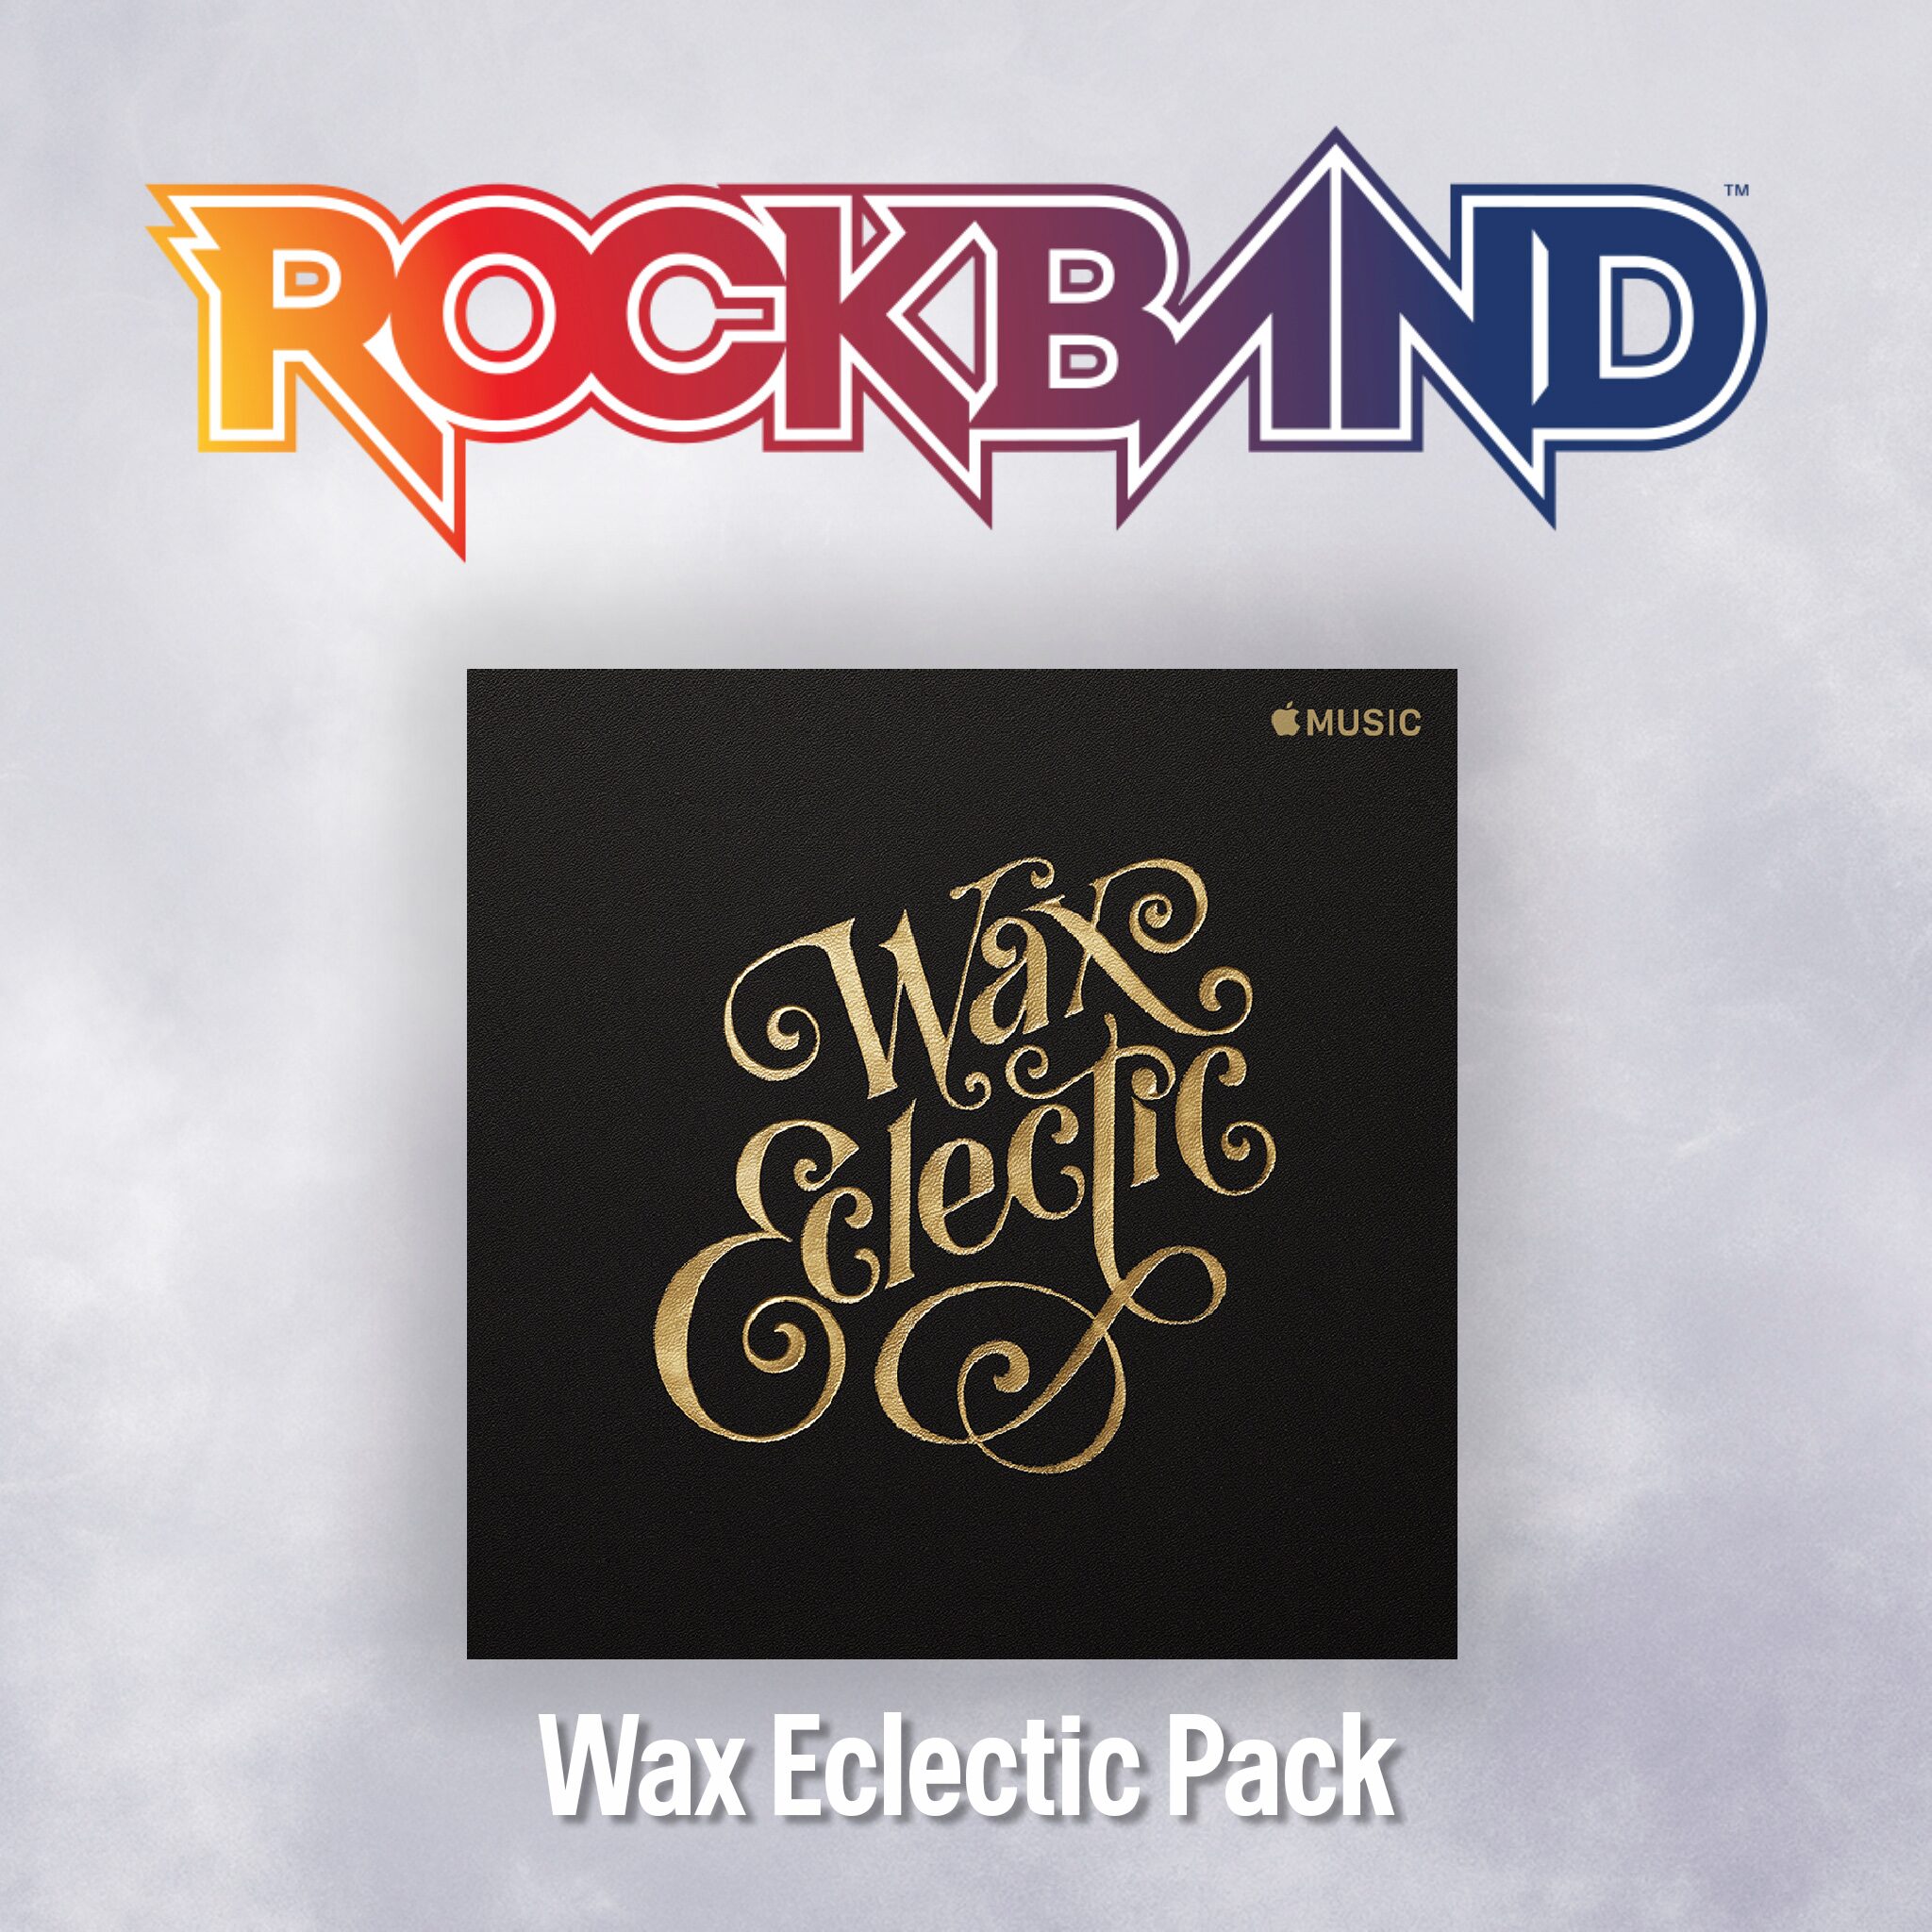 Wax Eclectic Pack